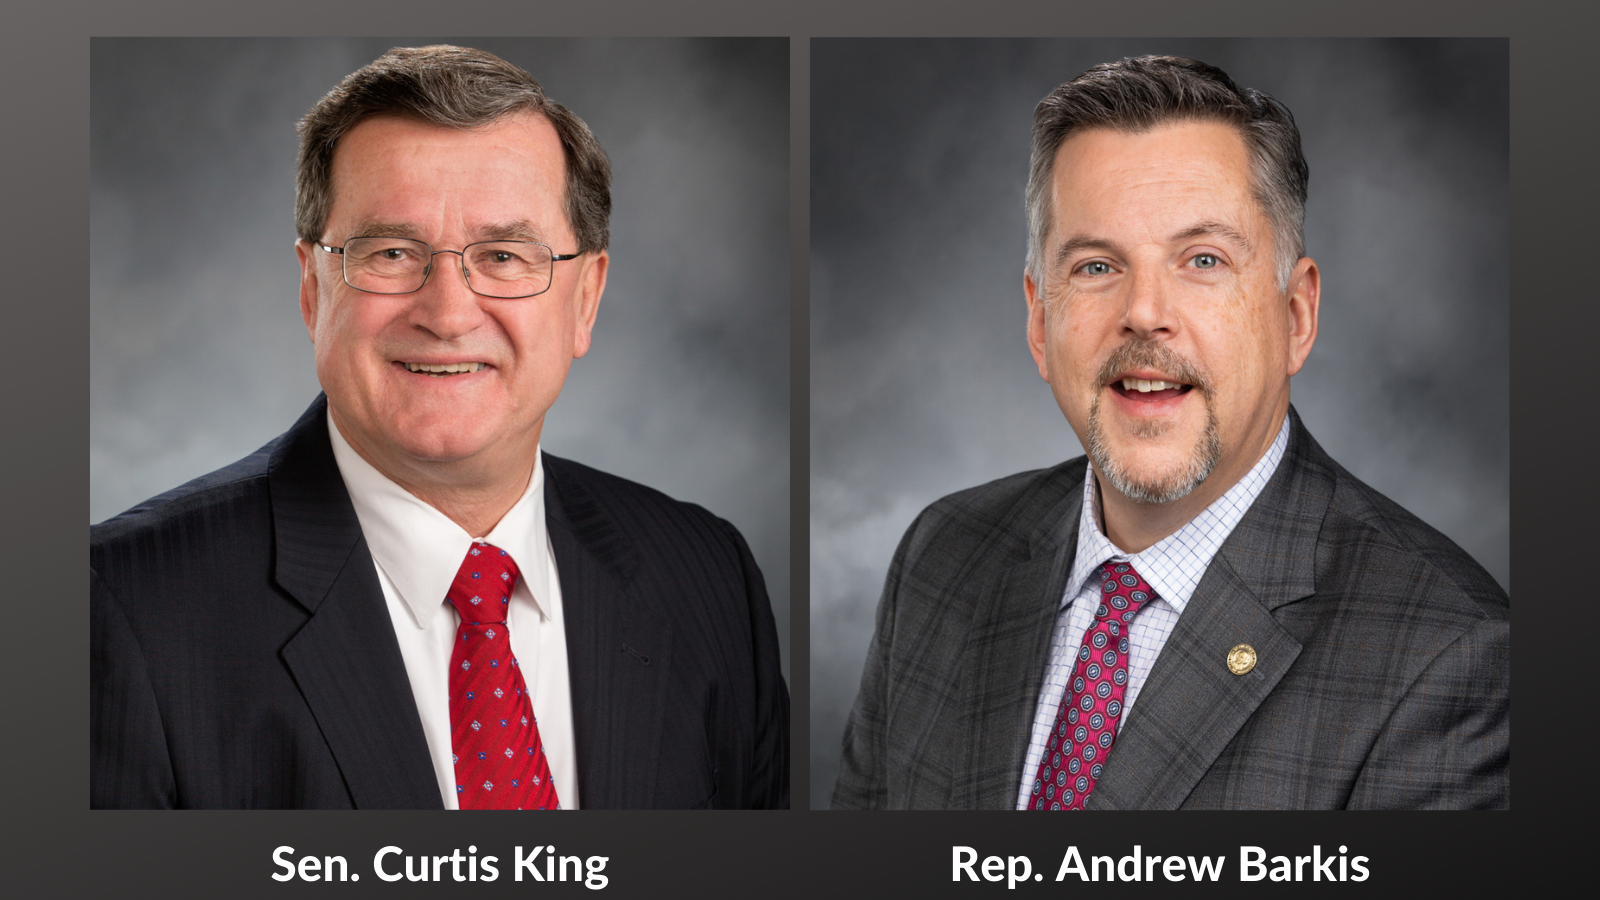 AUDIO: Statement from Republican transportation leaders on the agreement reached by the Legislature on the Move Ahead Washington transportation package